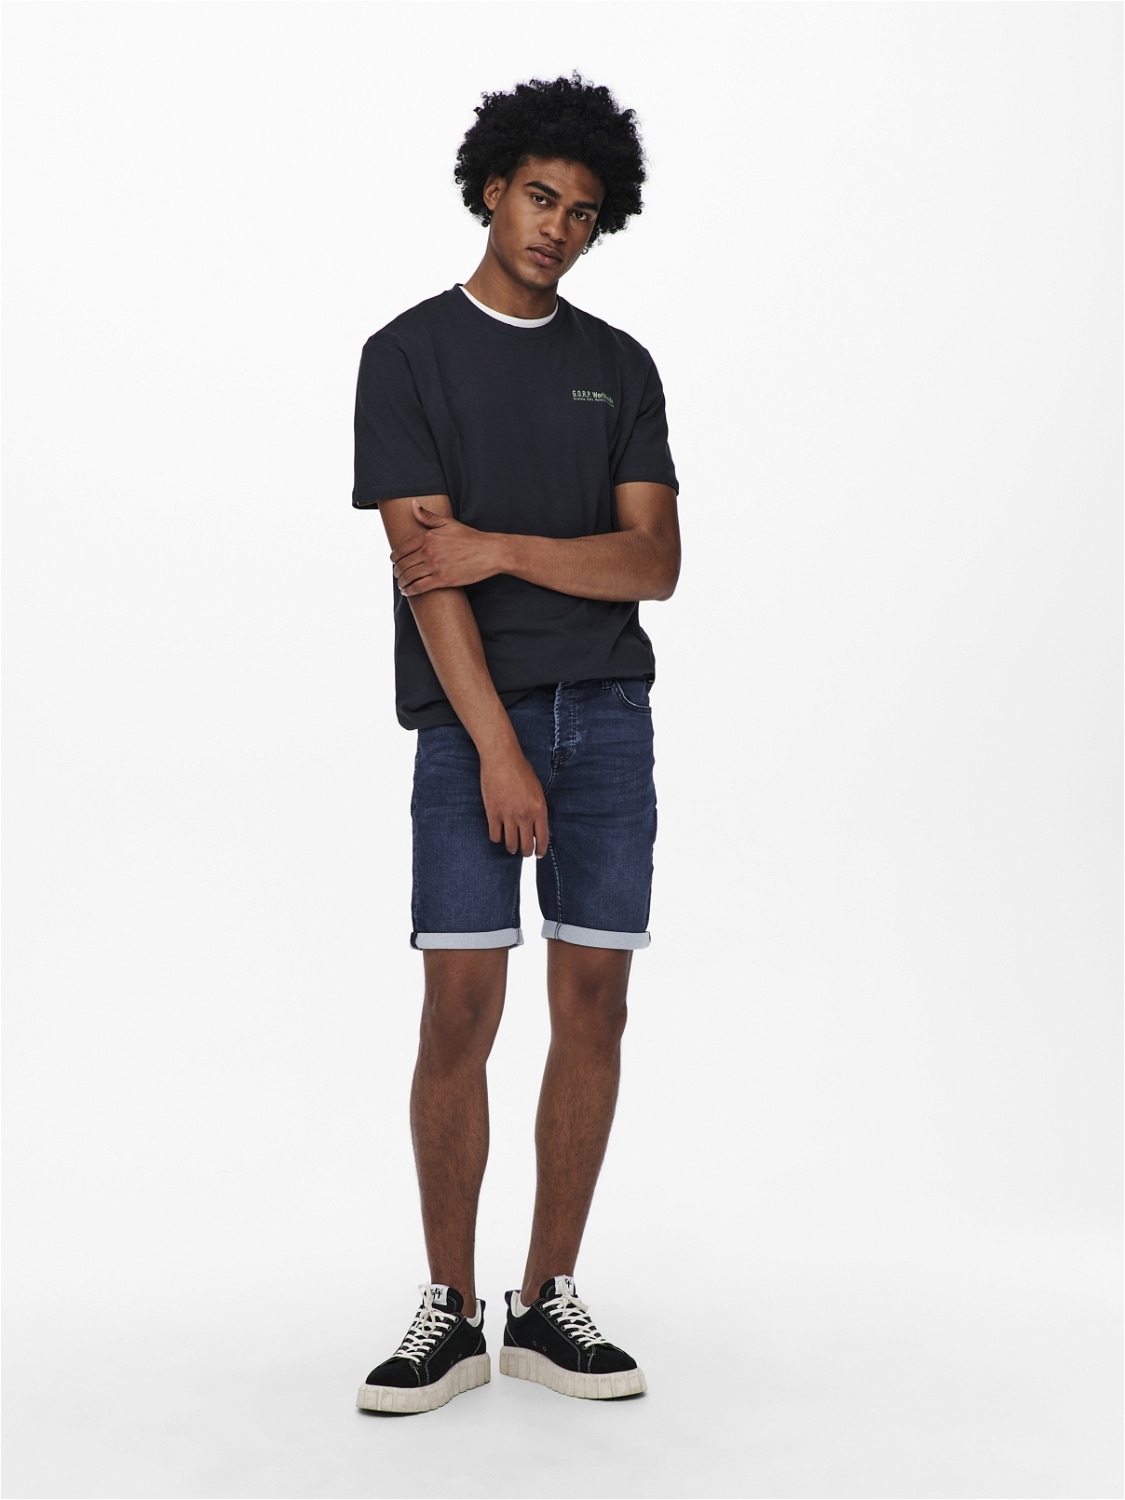 ONLY & SONS Jeansshorts »ONSPLY LIGHT BLUE 5189 SHORTS DNM NOOS«